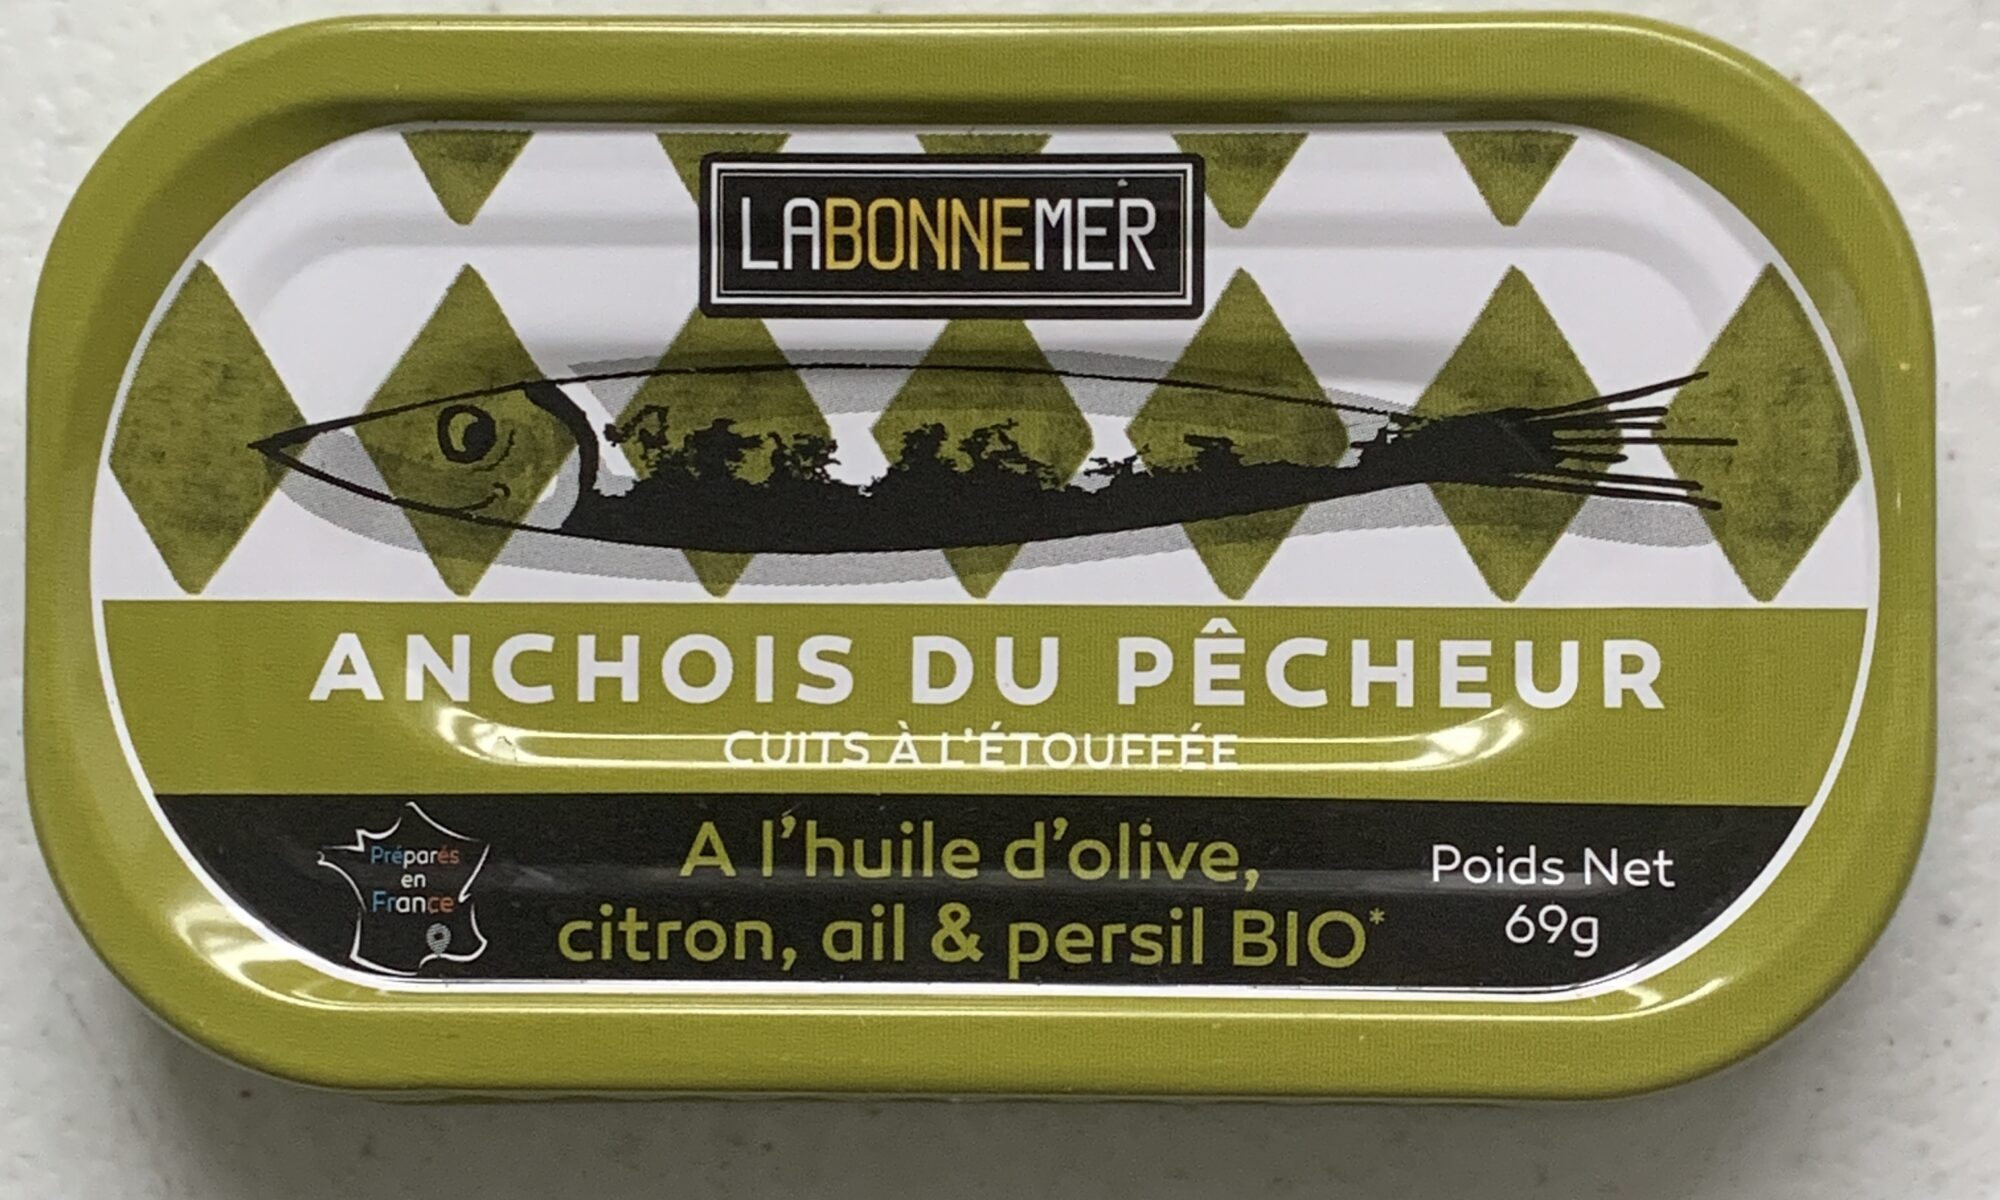 Image of the front of a tin of Ferrigno La Bonne Mer Fisherman's Anchovies